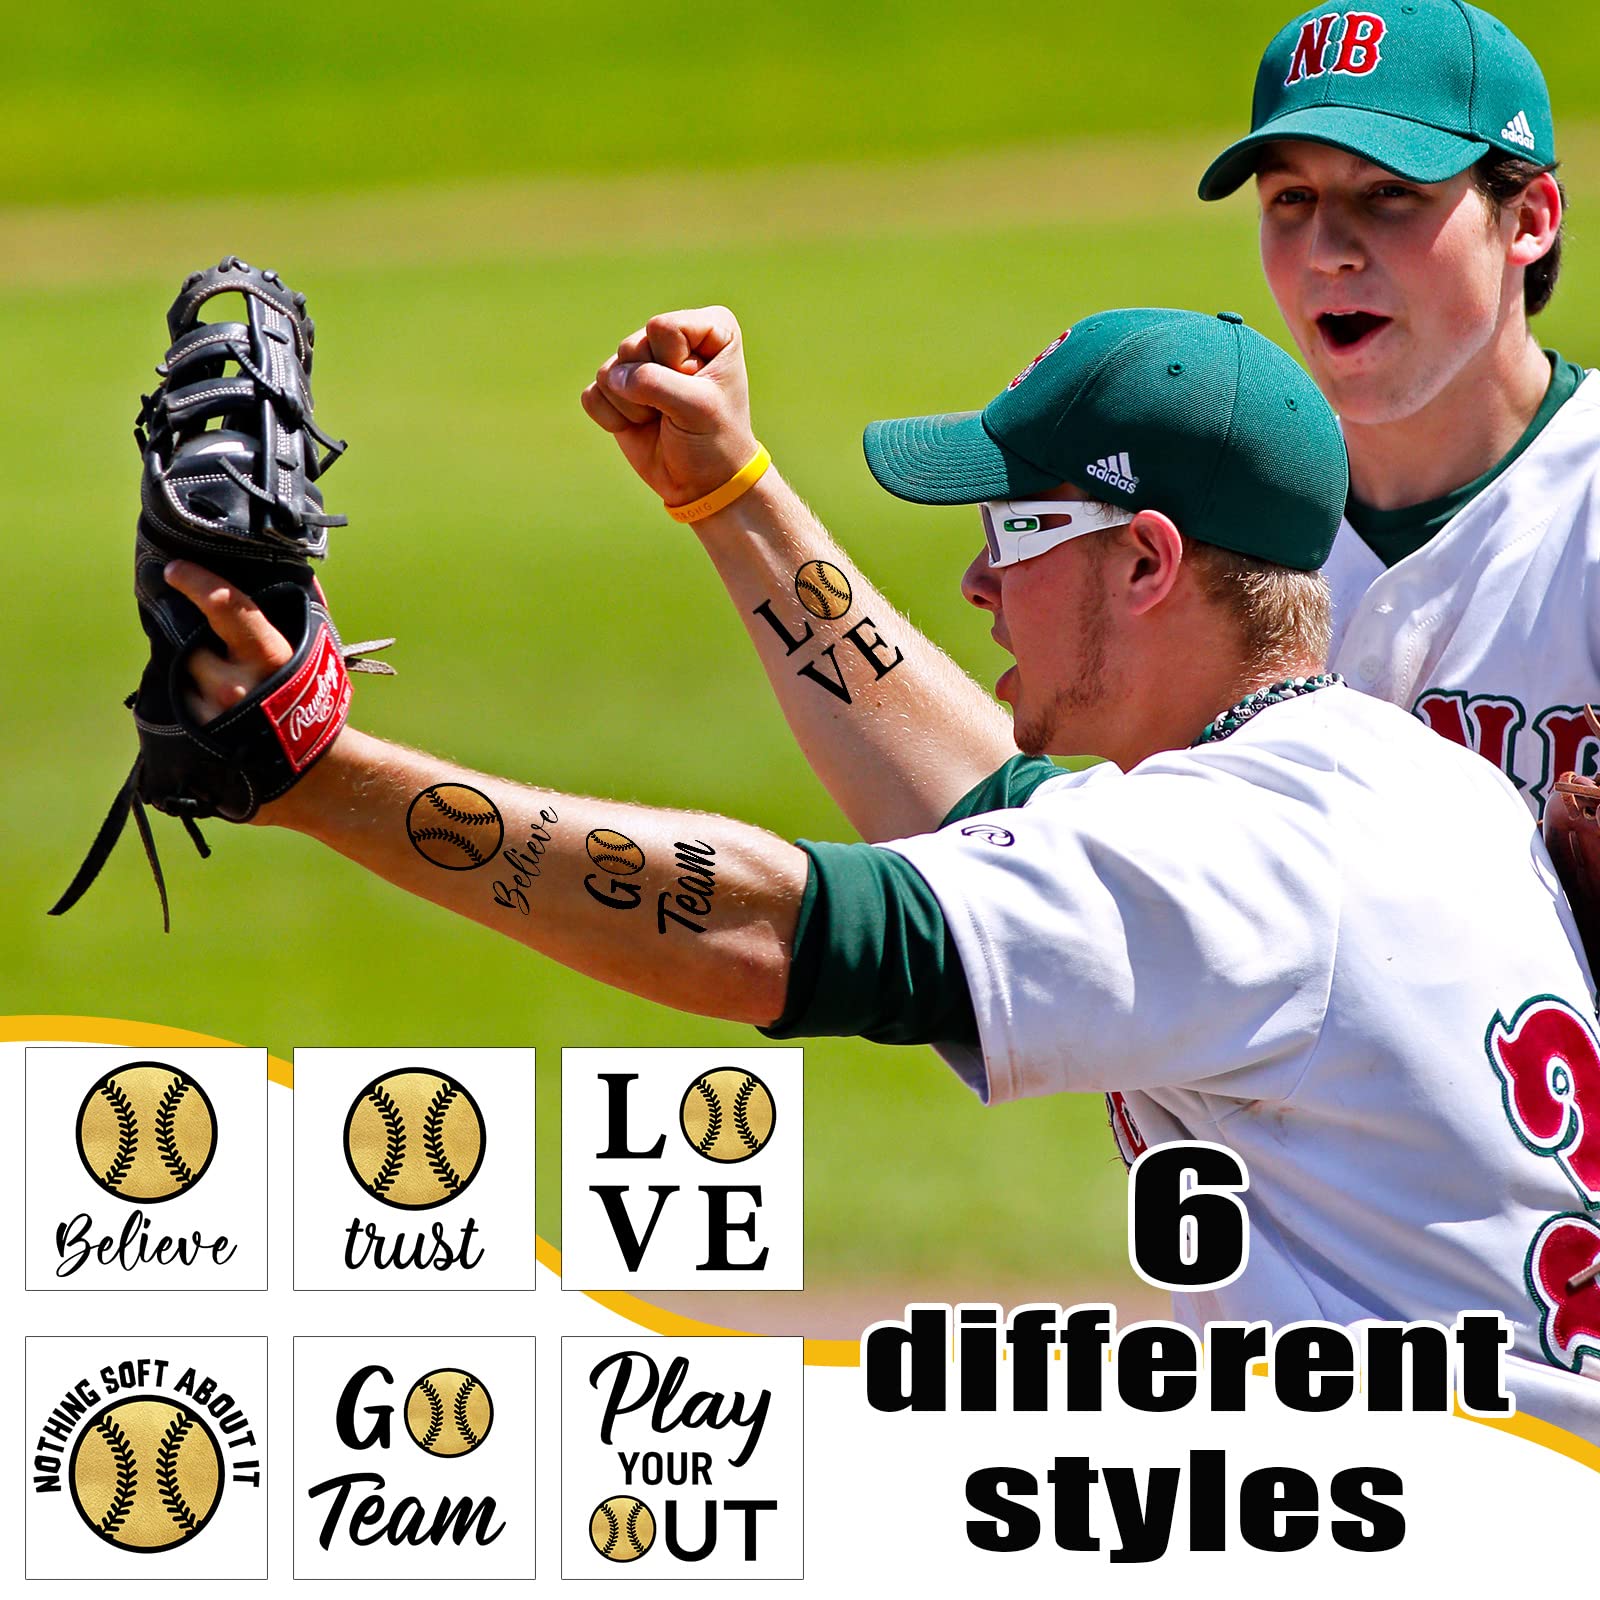 120 Pcs Softball Temporary Tattoos for Team Softball Team Gift Sports Waterproof Body Temporary Stickers Gold Softball Tattoo for Softball Team Boys Girls Fans Party Supplies, 6 Styles